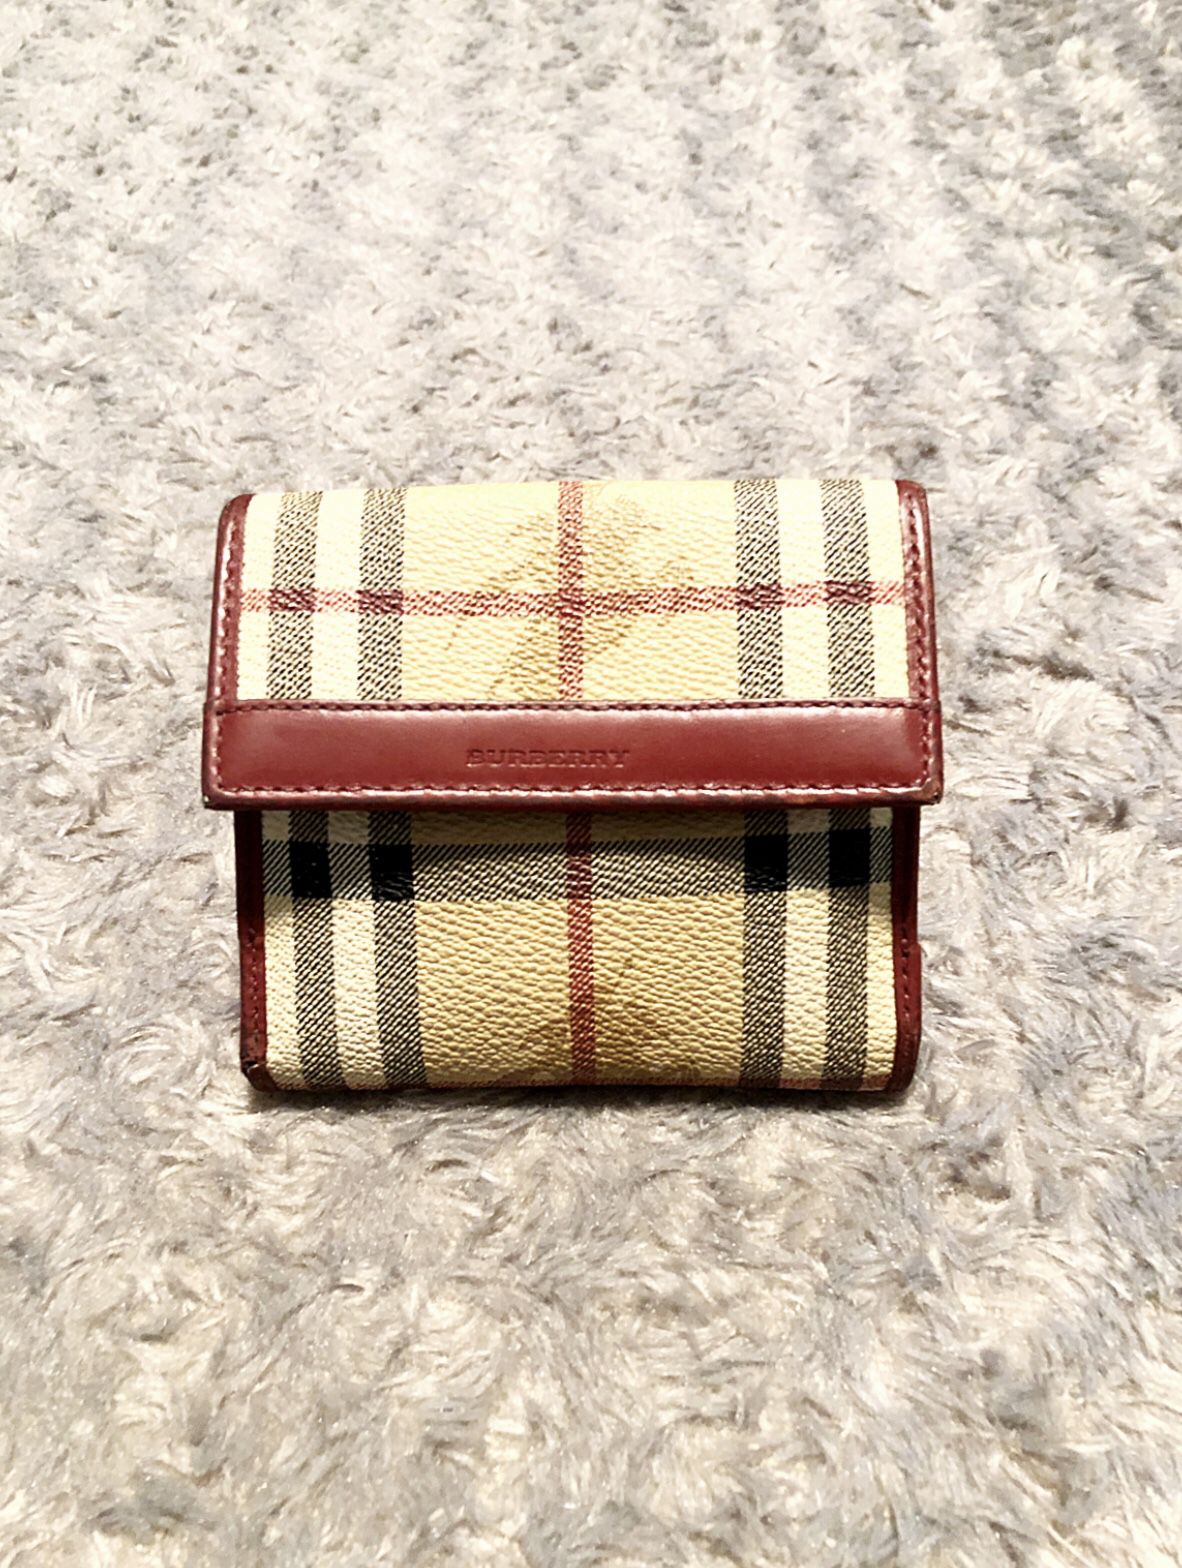 Vintage Burberry wallet paid $480 Authentic; normal wear. The edges of the wallet have signs of wear, and the lining is loose other then that good co